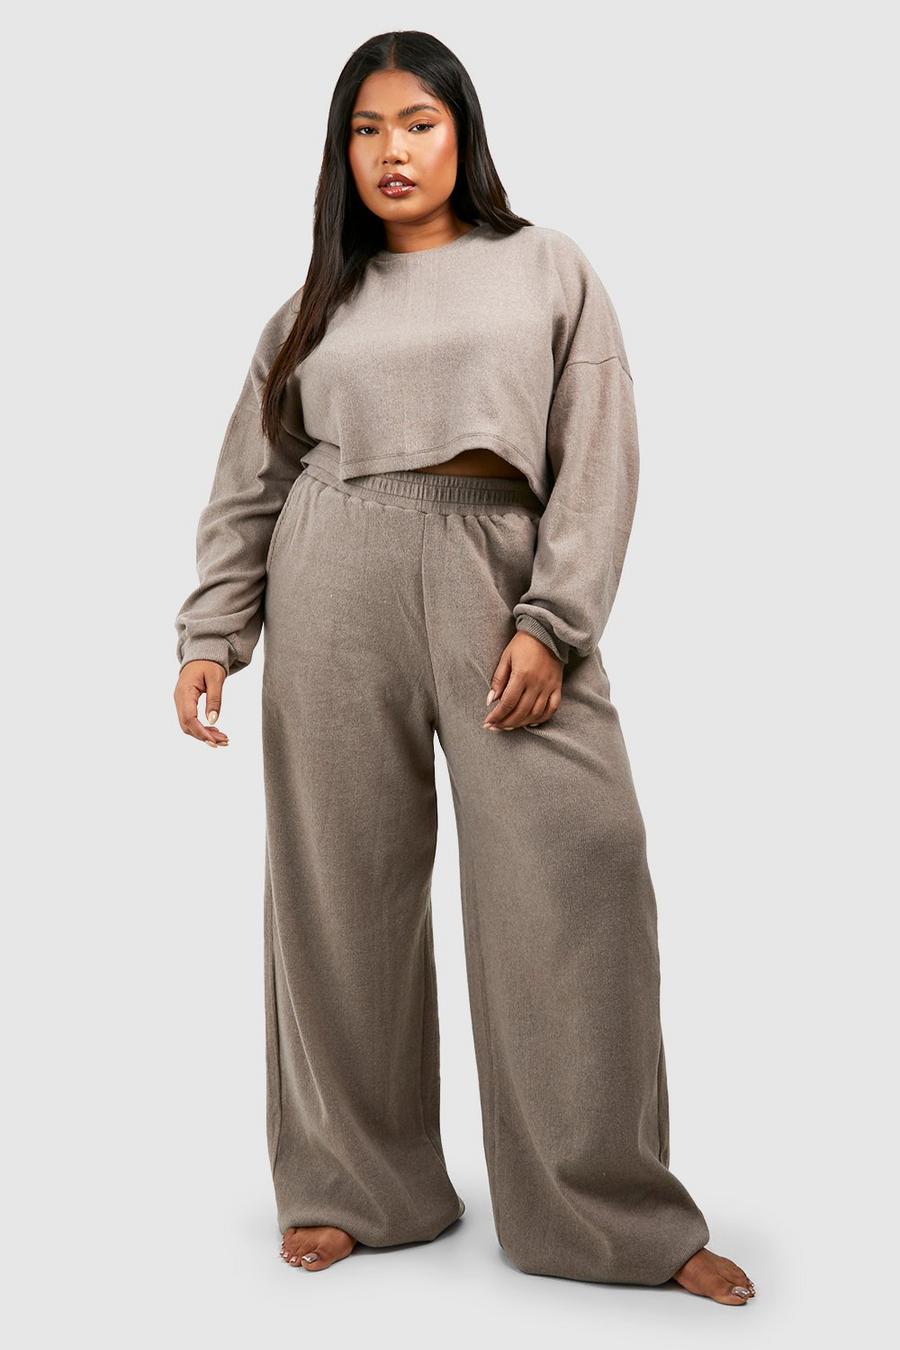 Taupe Chiasso Dropped Crotch Pants loden-green And Boxy Crop Set